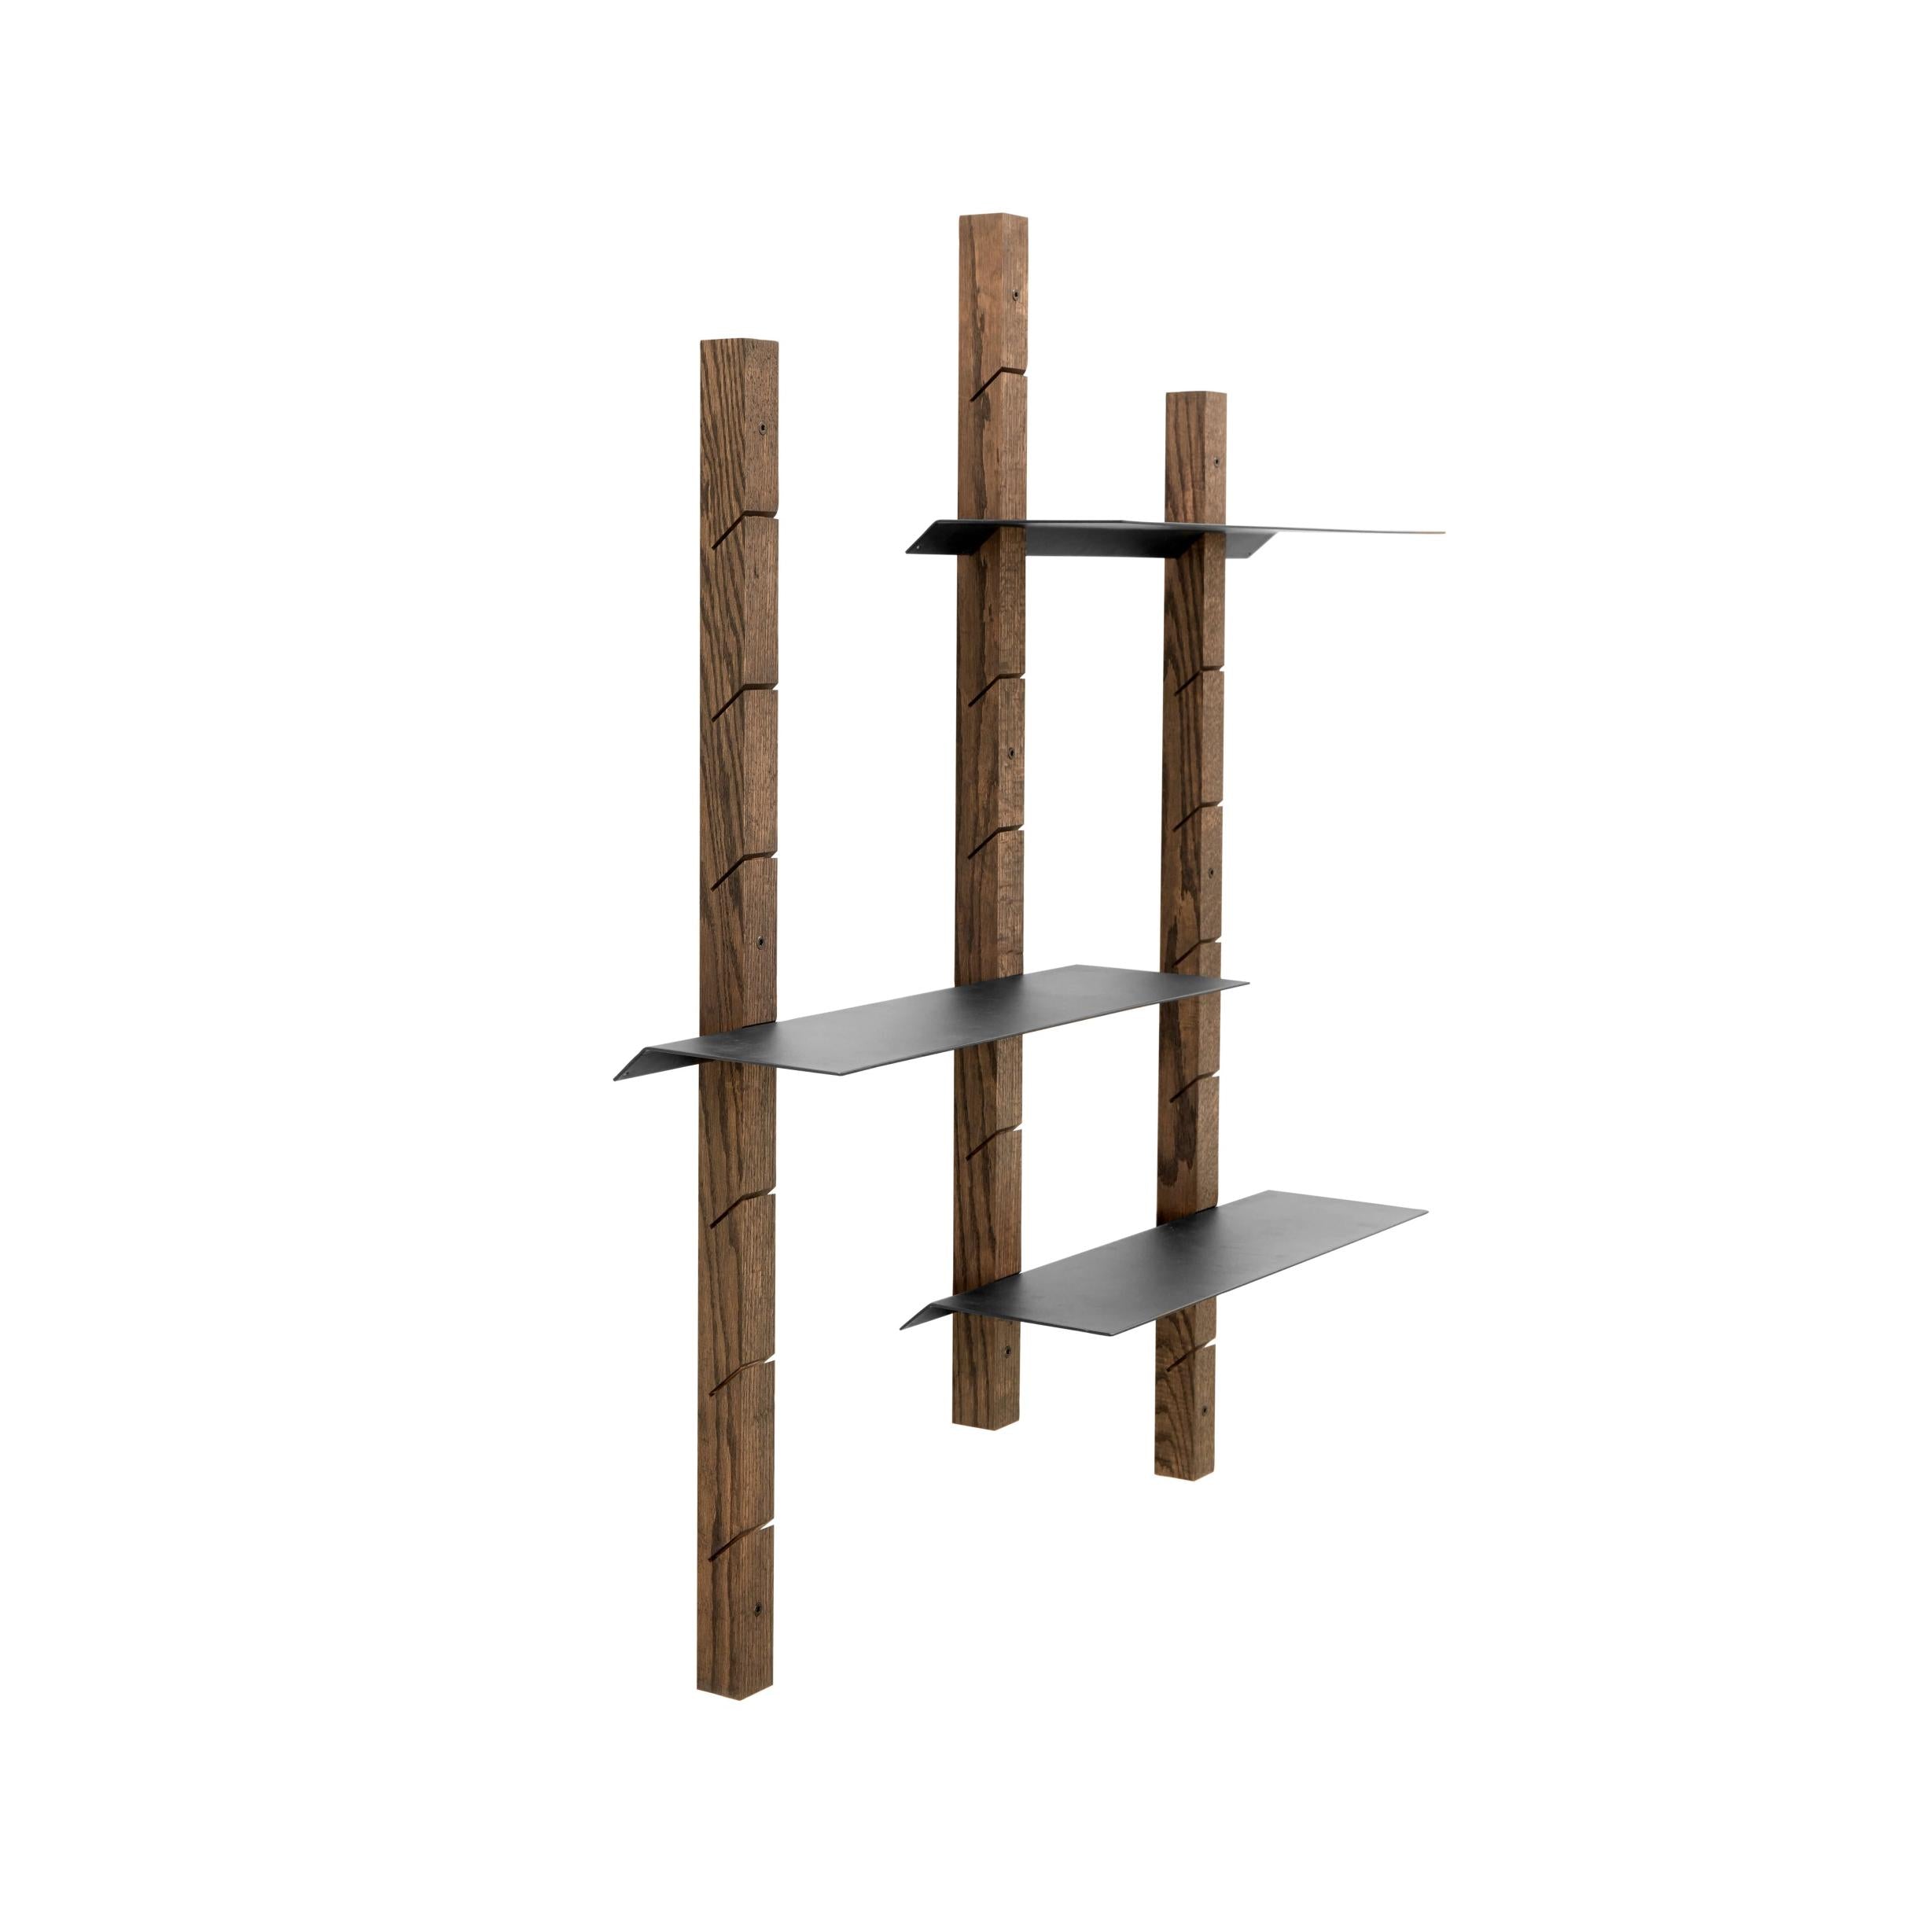 Muubs Oaks Shelving System Stained Oak, 120cm